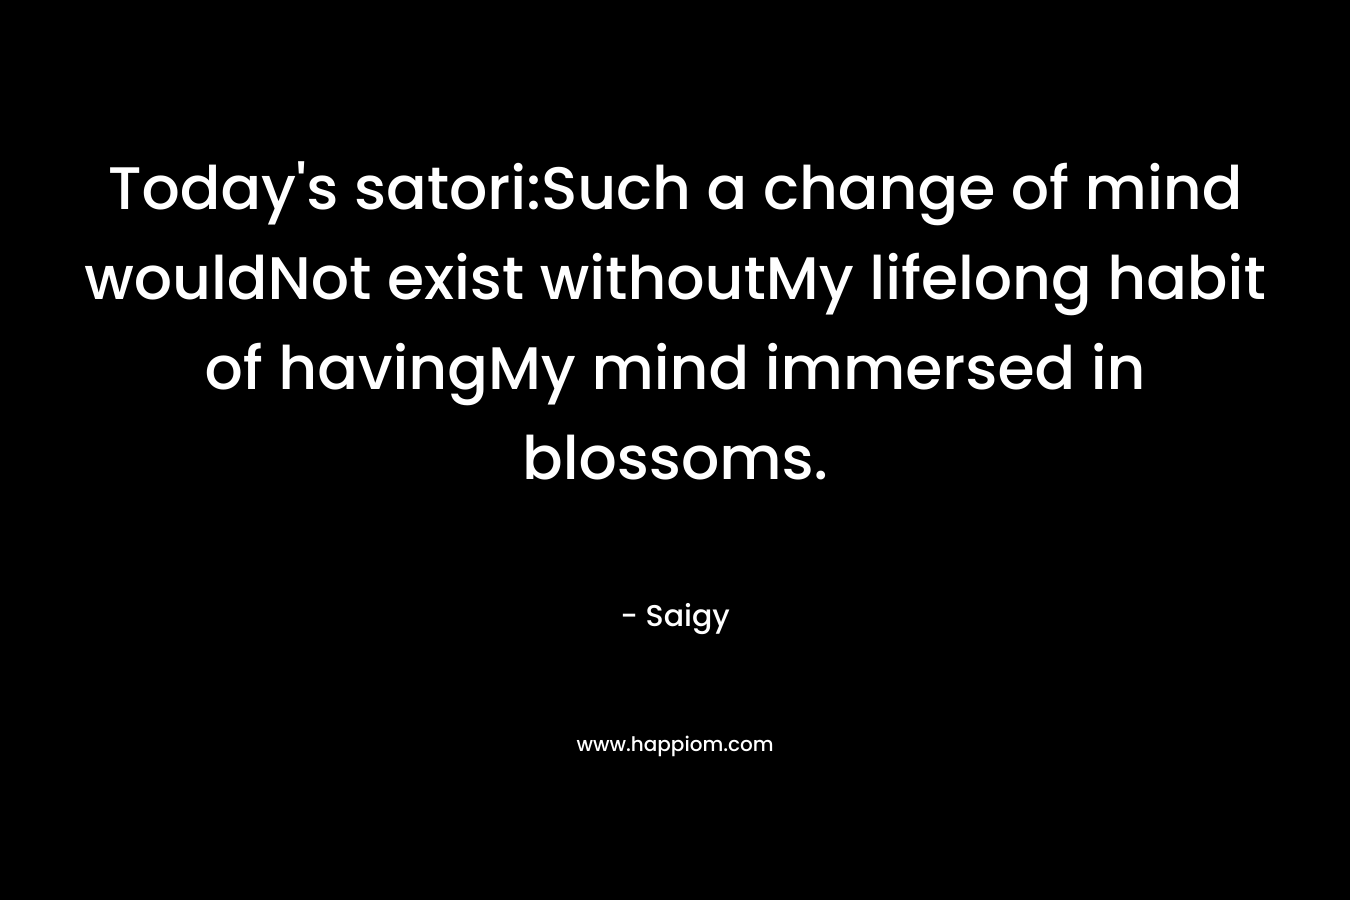 Today's satori:Such a change of mind wouldNot exist withoutMy lifelong habit of havingMy mind immersed in blossoms.